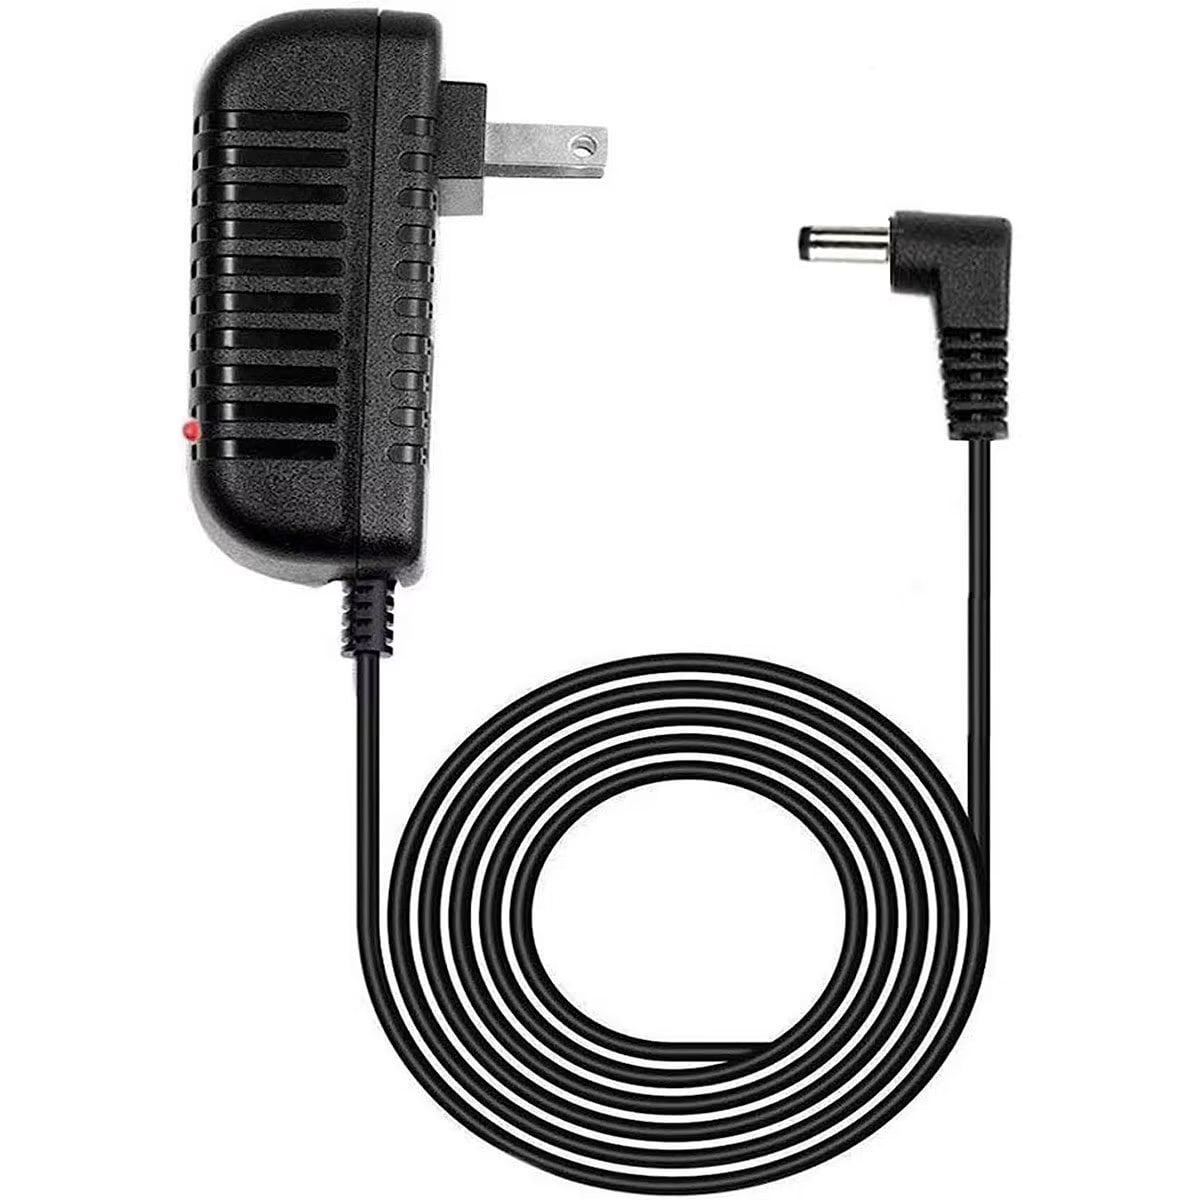 Generic Power Cord for Braun Shaver Series 7 3 5 S3 Charger for Braun  Electric Razor 190/199 Replacement 12V Adapter US Plug @ Best Price Online